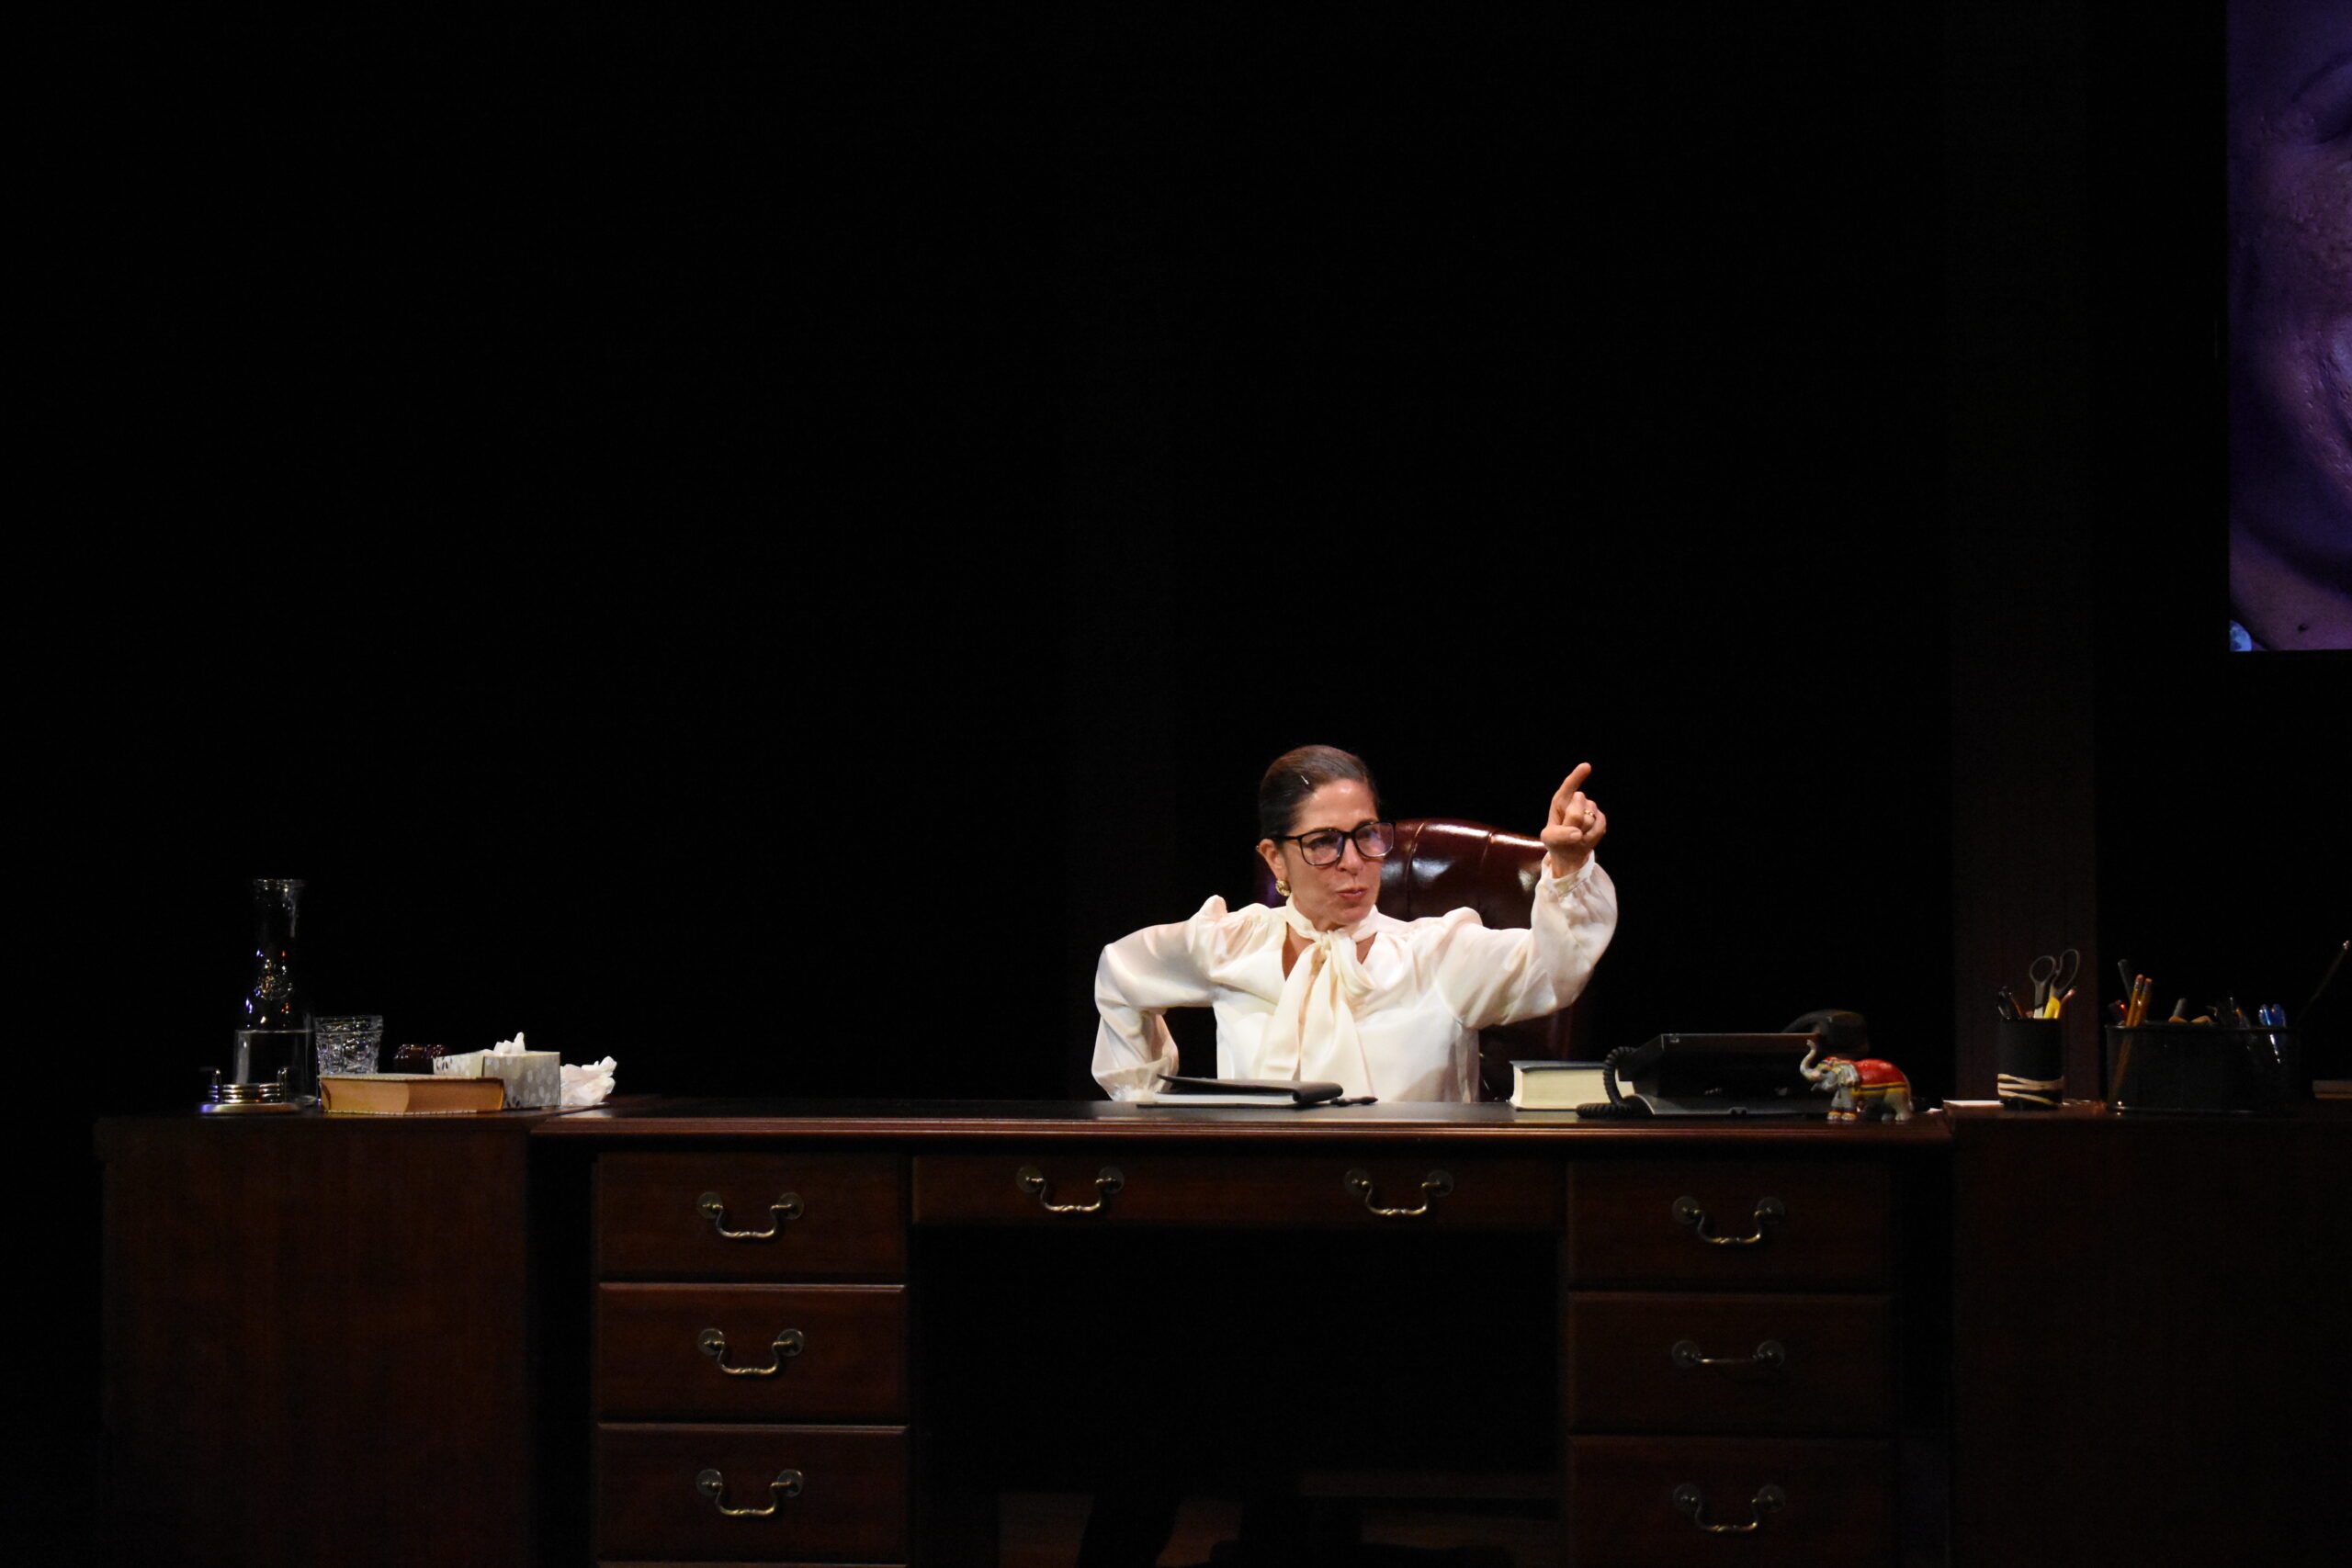 Michelle Azar as Ruth Bader Ginsburg in “All Things Equal: The Life and Trials of Ruth Bader Ginsburg” at Bay Street Theater. COURTESY BAY STREET THEATER